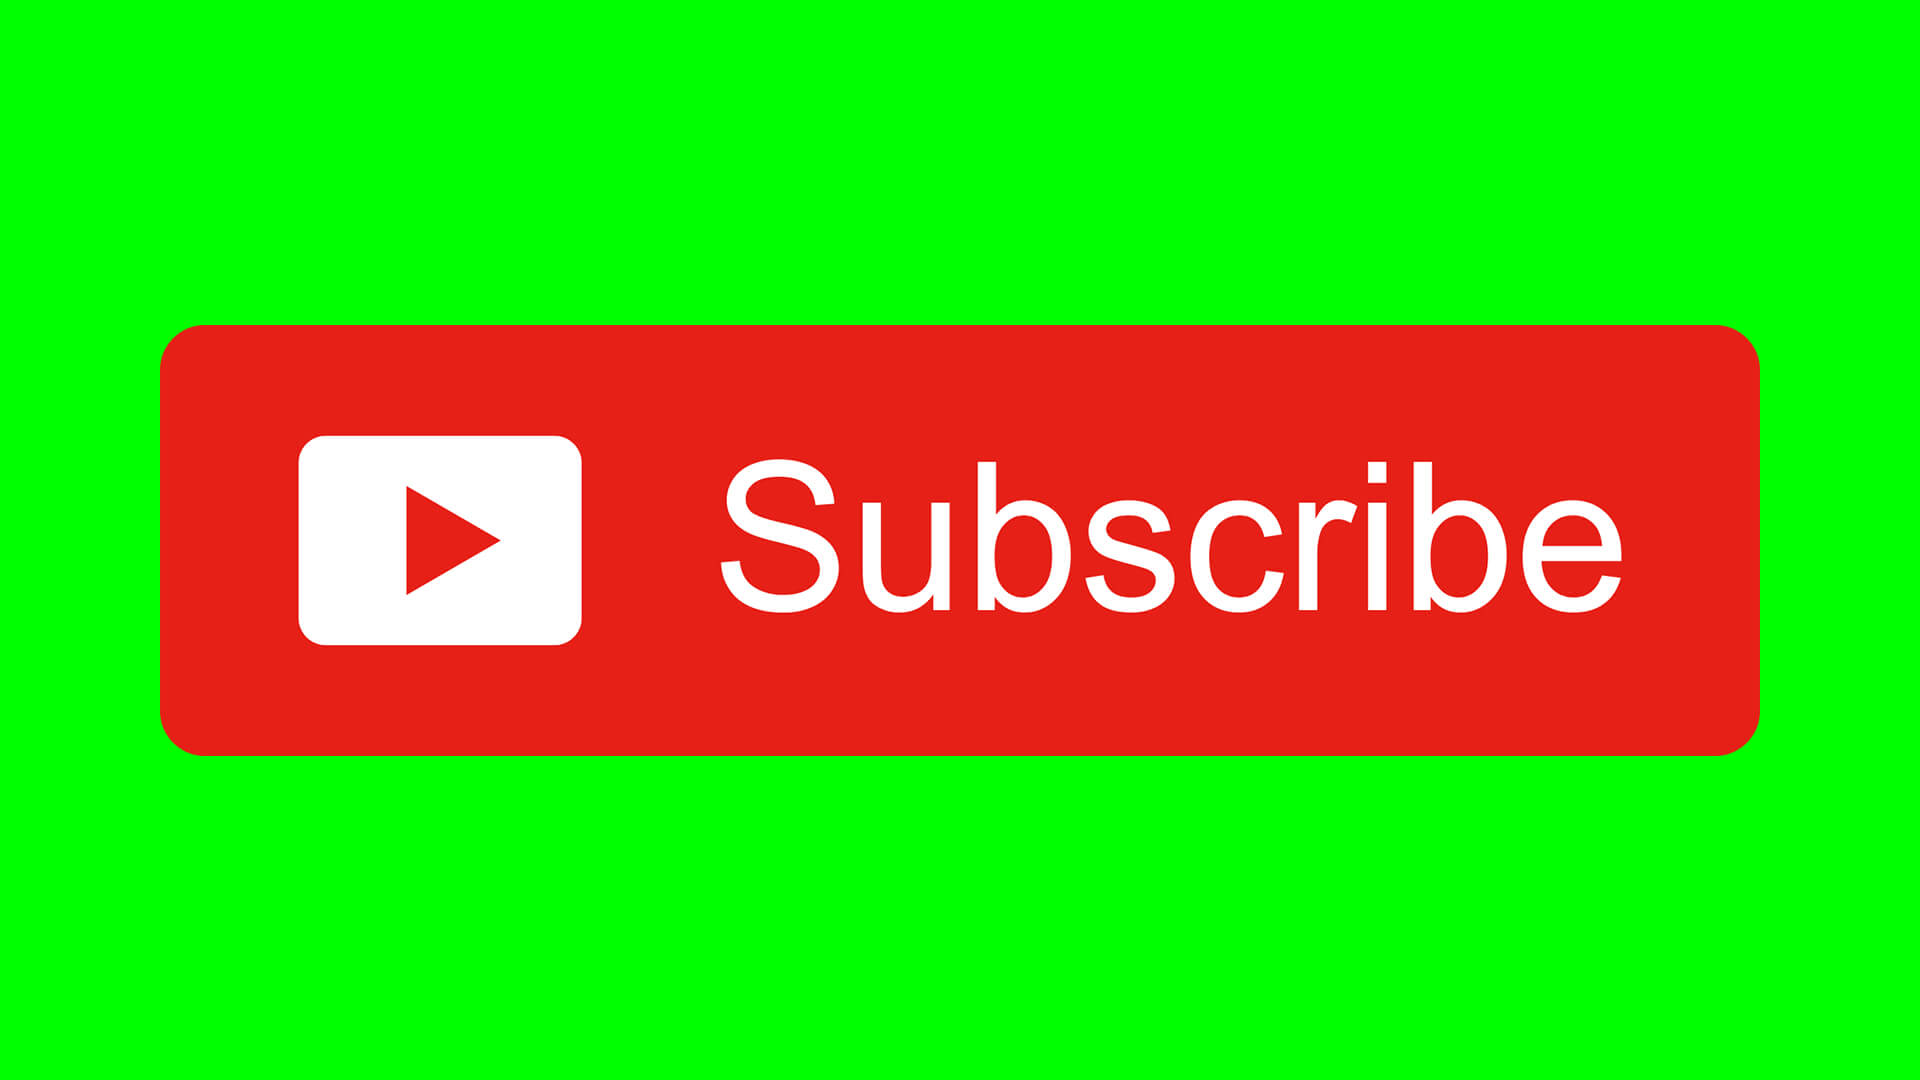 Free YouTube Subscribe Button Download Design Inspiration By AlfredoCreates Green Screen 1